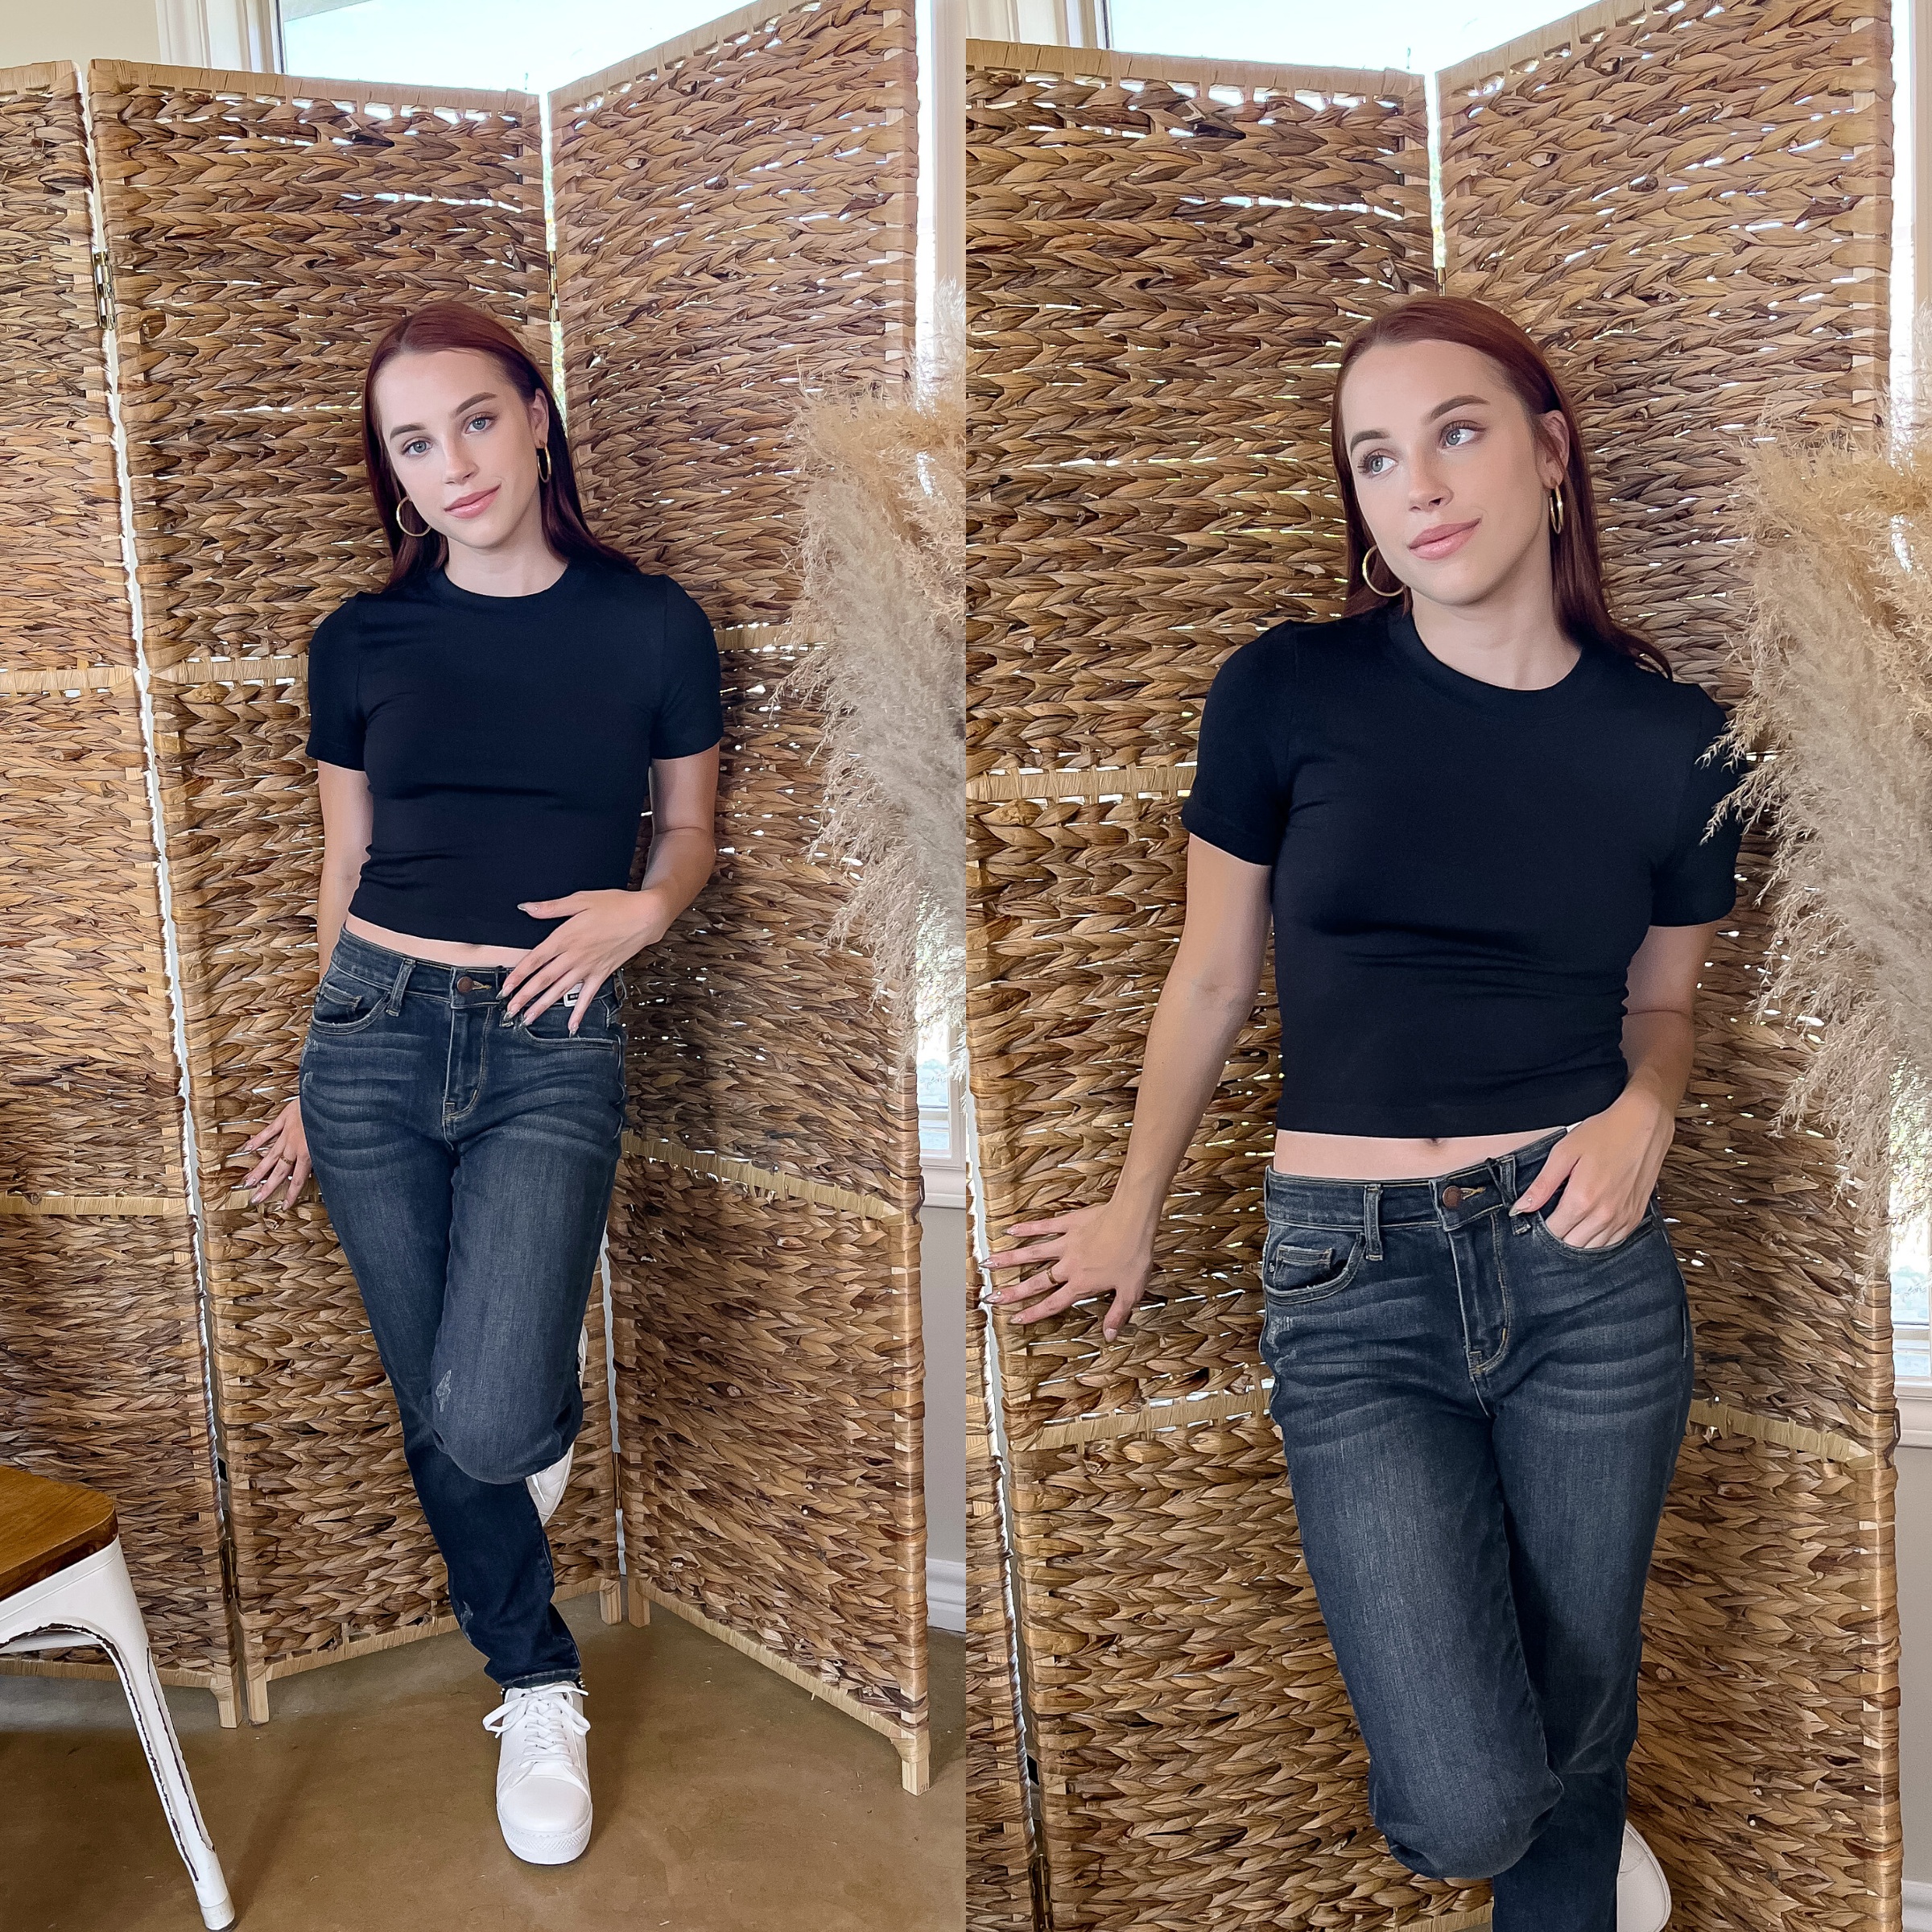 Model is wearing a black, high neck cropped short sleeve top with  dark blue jeans. She is also wearing gold hoops and white tennis shoes.